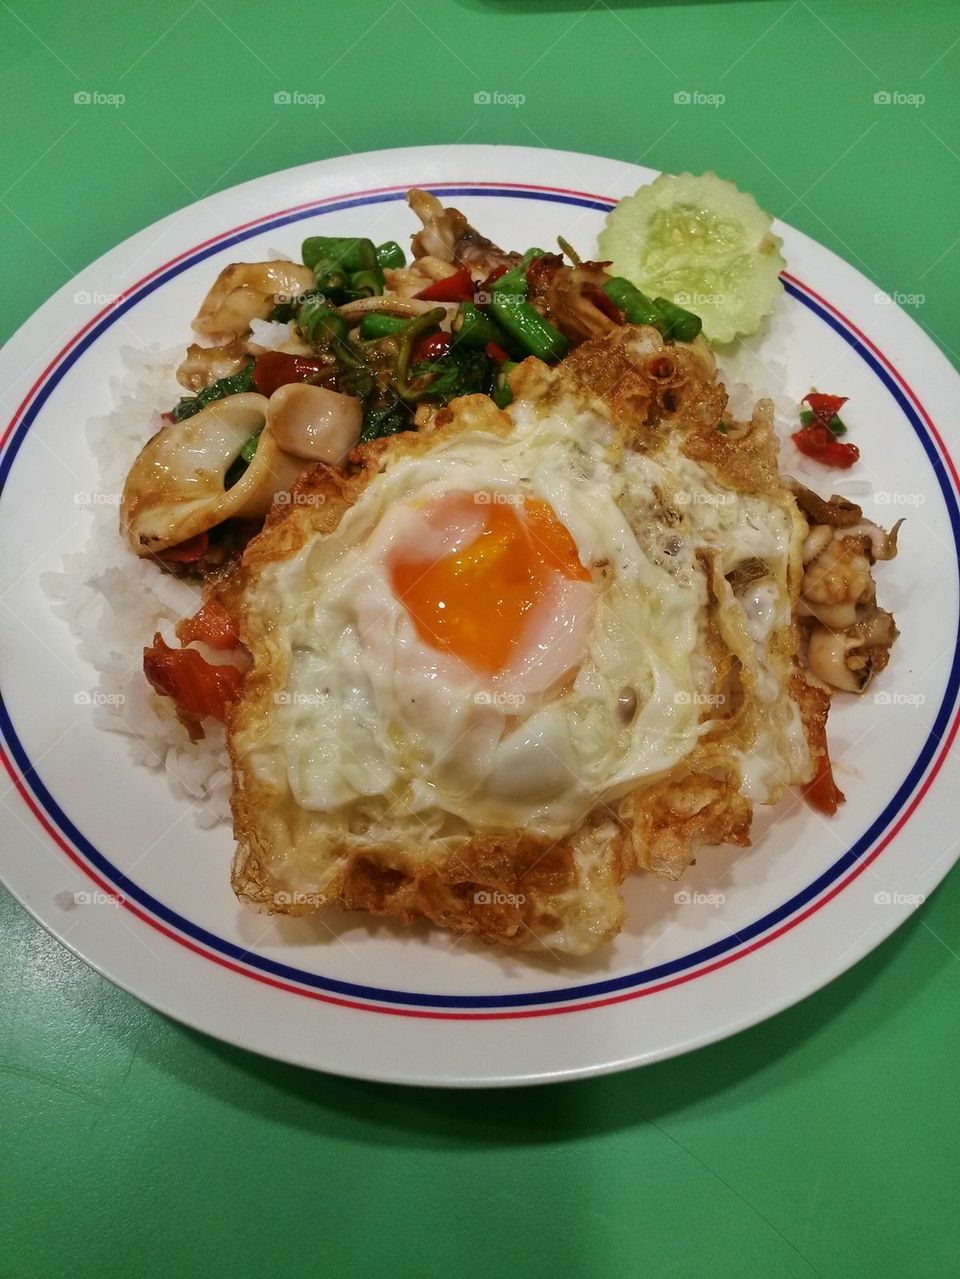 fired rice with egg